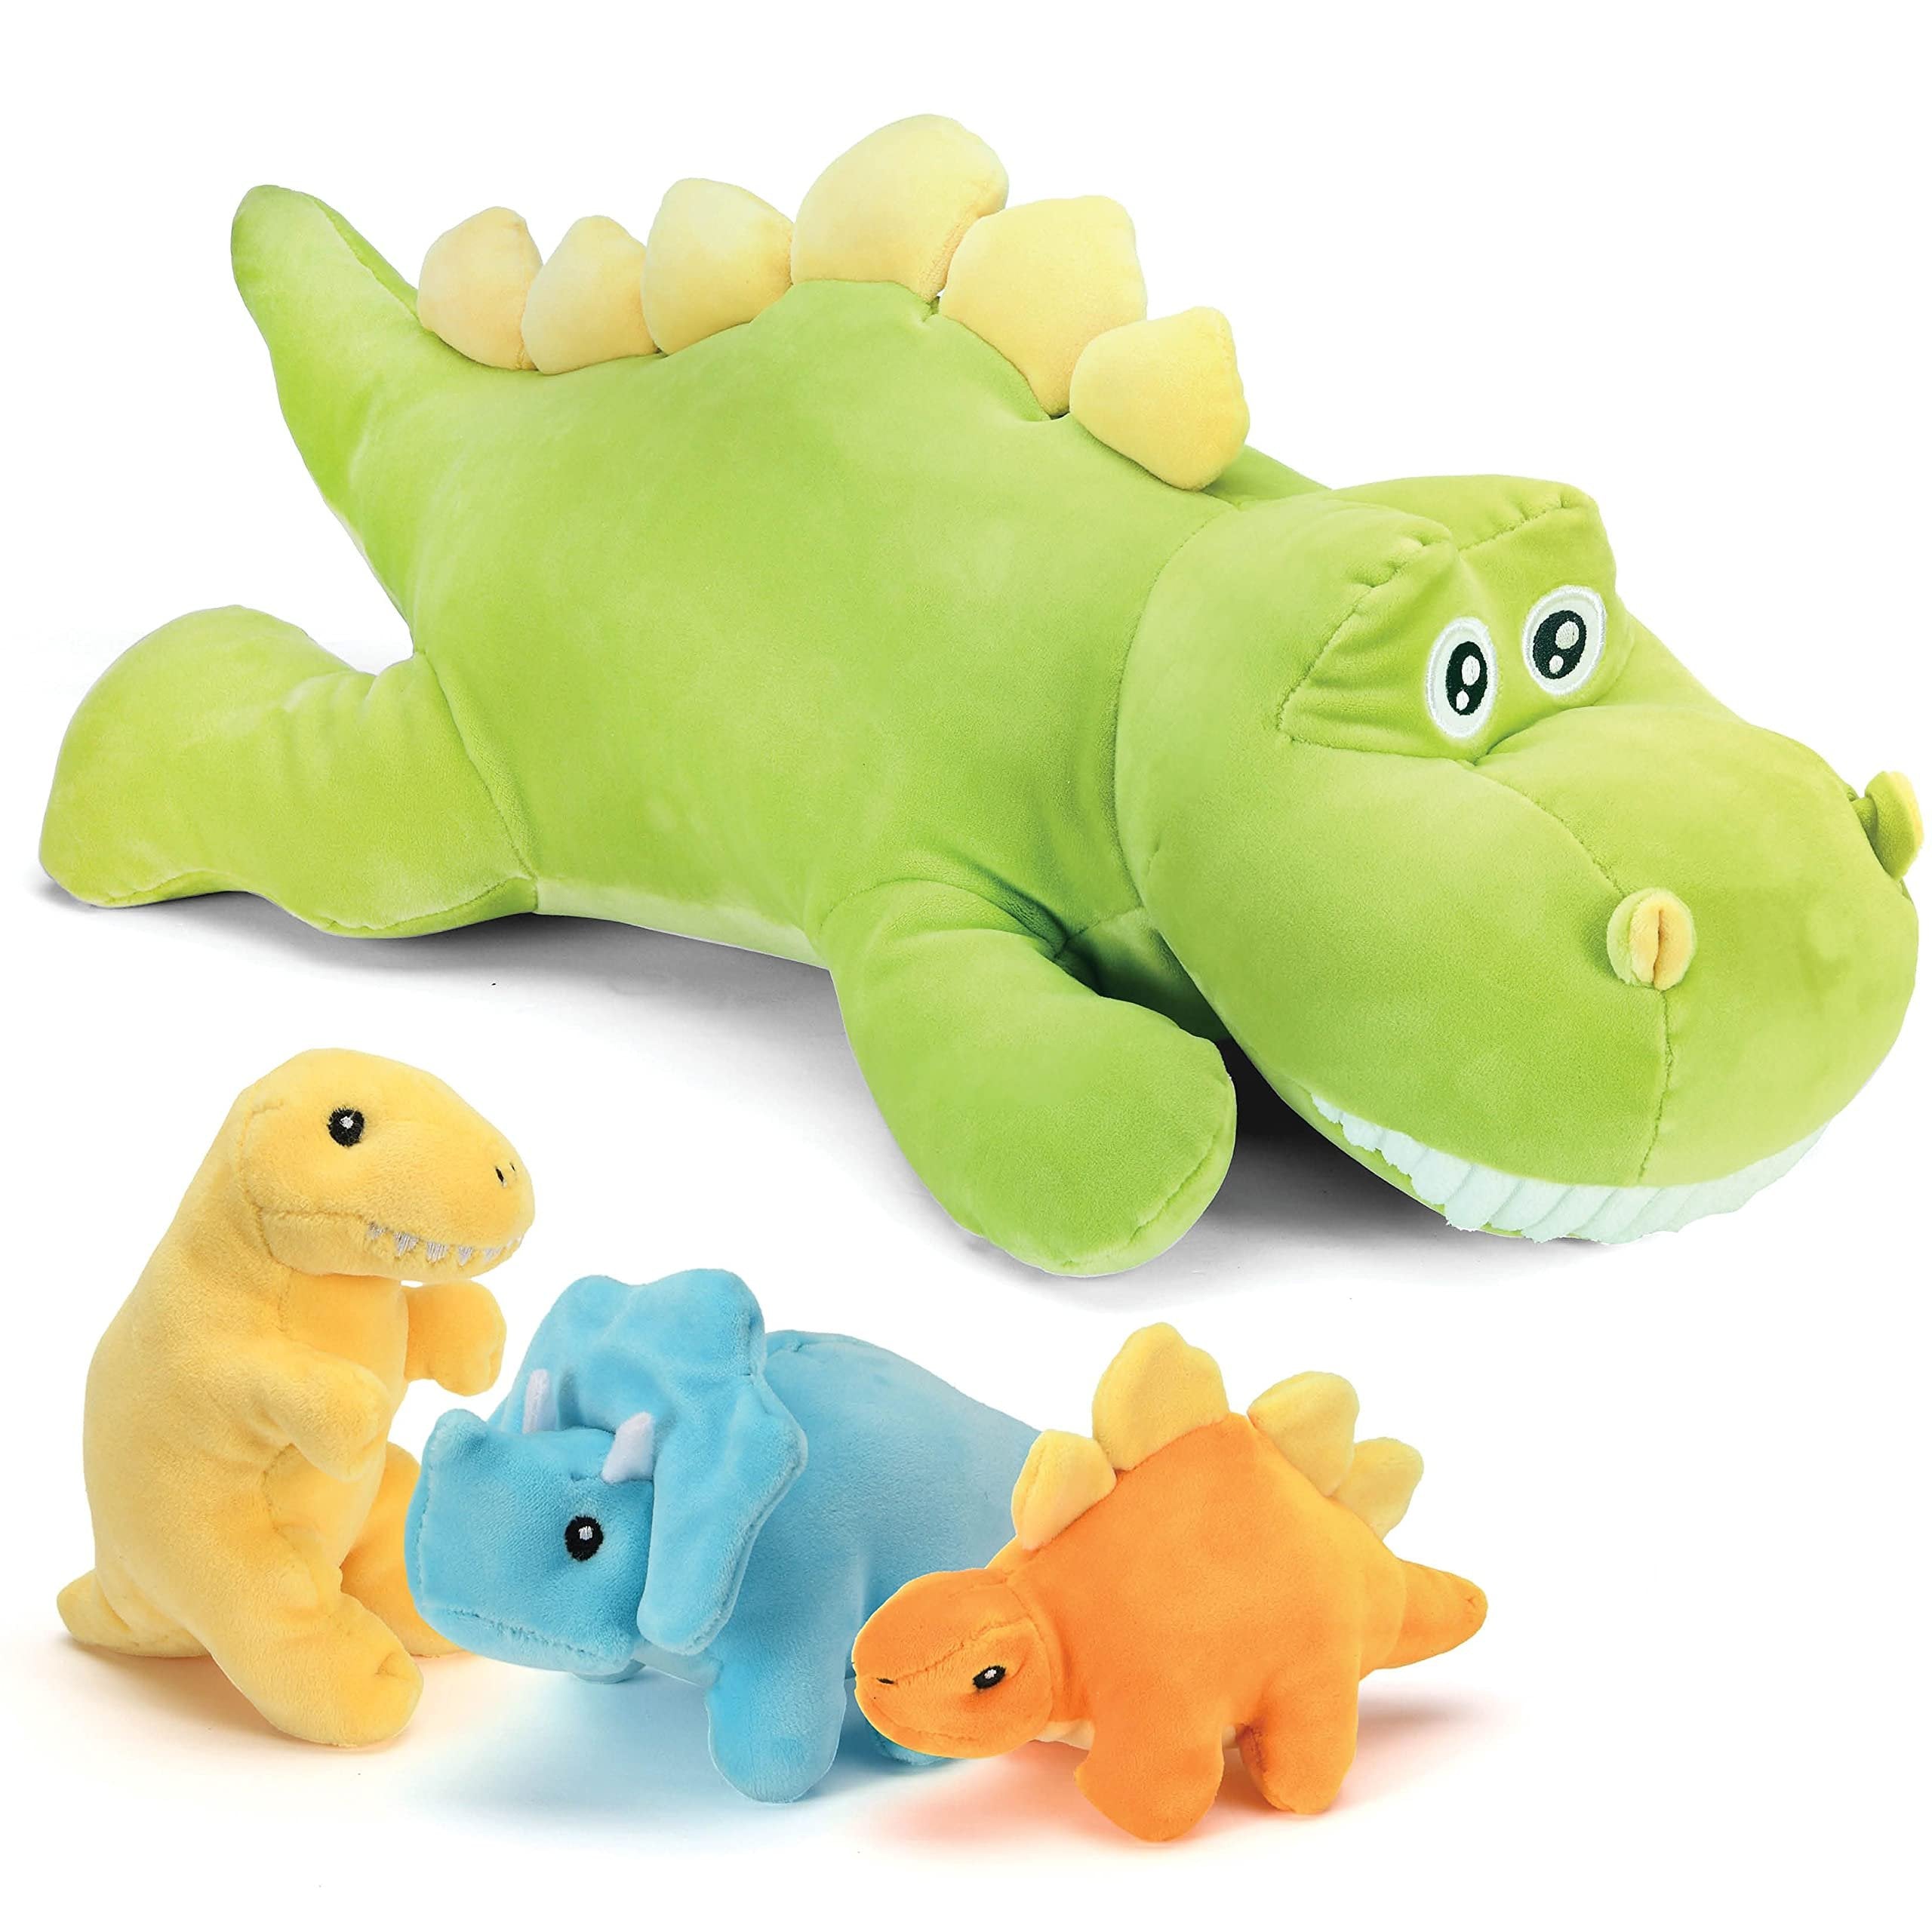 PREXTEX 15" Triceratops Dinosaur Stuffed Animal Set with 4 Dino Plush Toys Inside, Large Zippered Pouch Dinosaur for Boys & Girls, Stuffed Animals Dinosaur Toys for Kids 3-5, Colorful & Soft Plushies